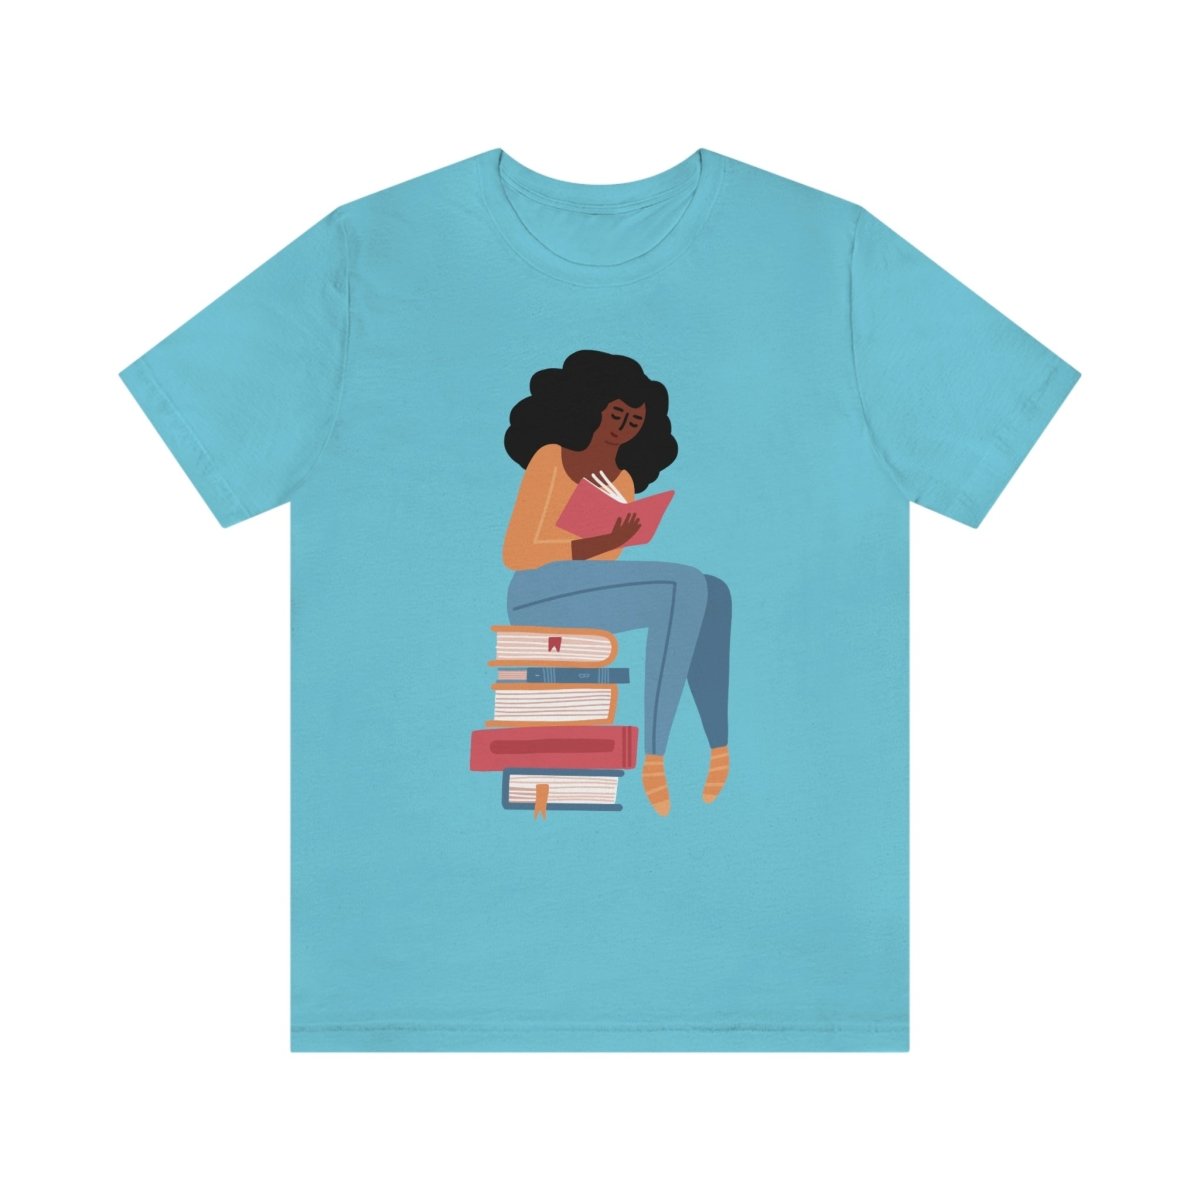 Afro Reader Shirt - The Trini Gee